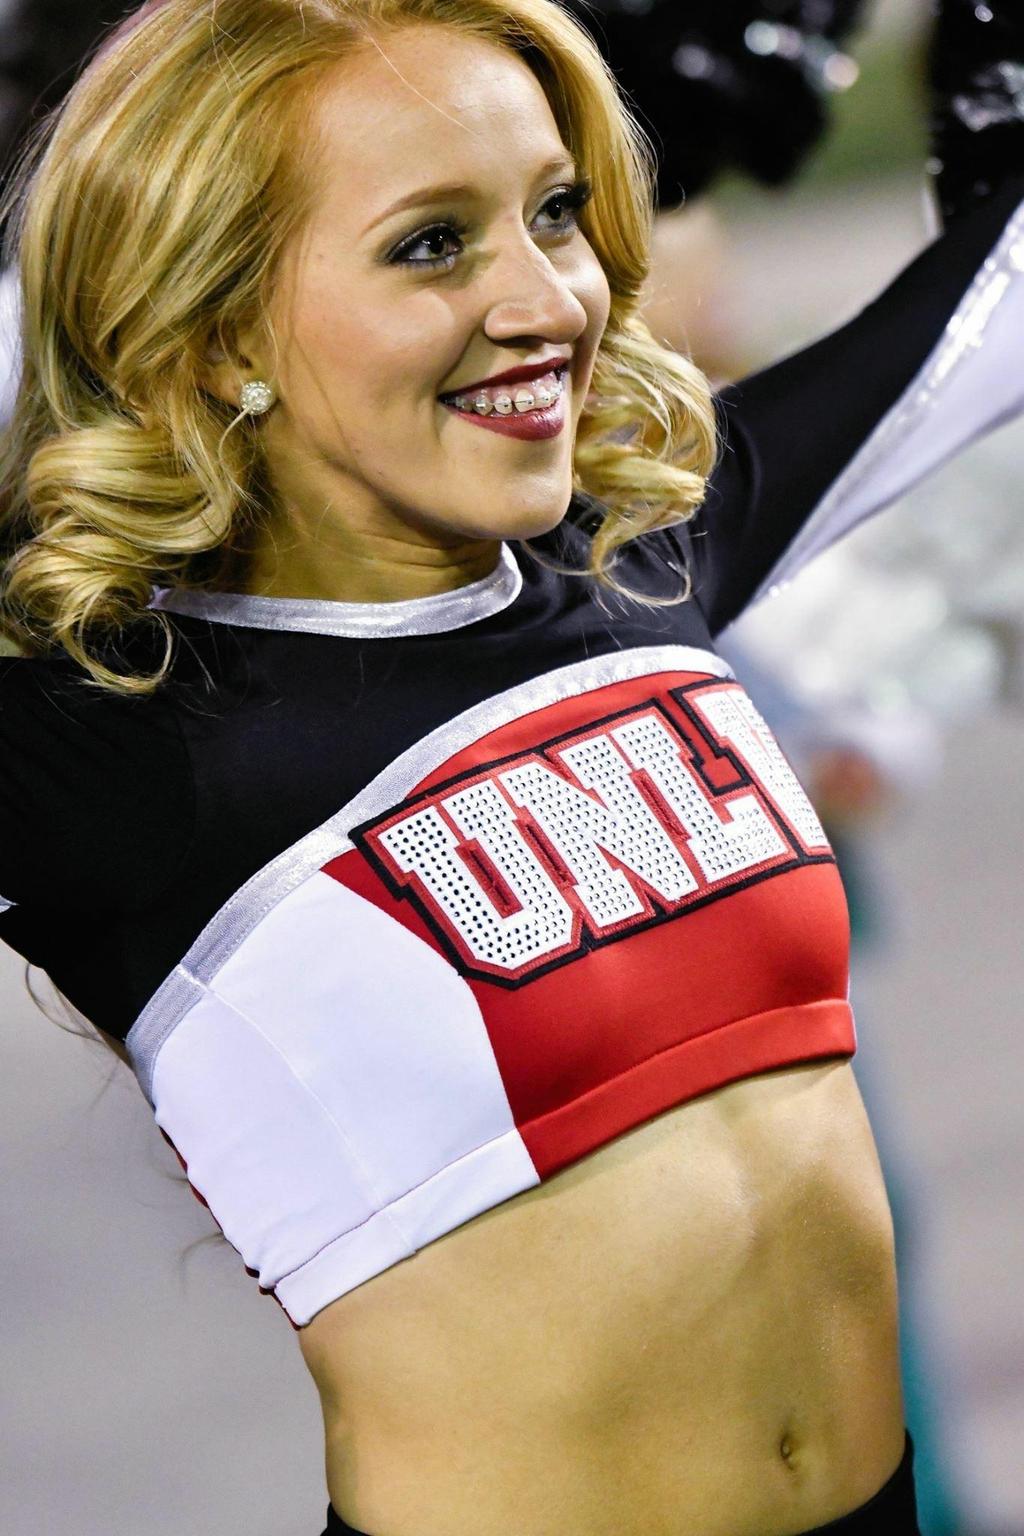 DANCE PROGRAM - OVERVIEW PURPOSE The Pom Team s purpose is to support the Athletic Department and other athletic teams at UNLV. We also attend campus and community events.